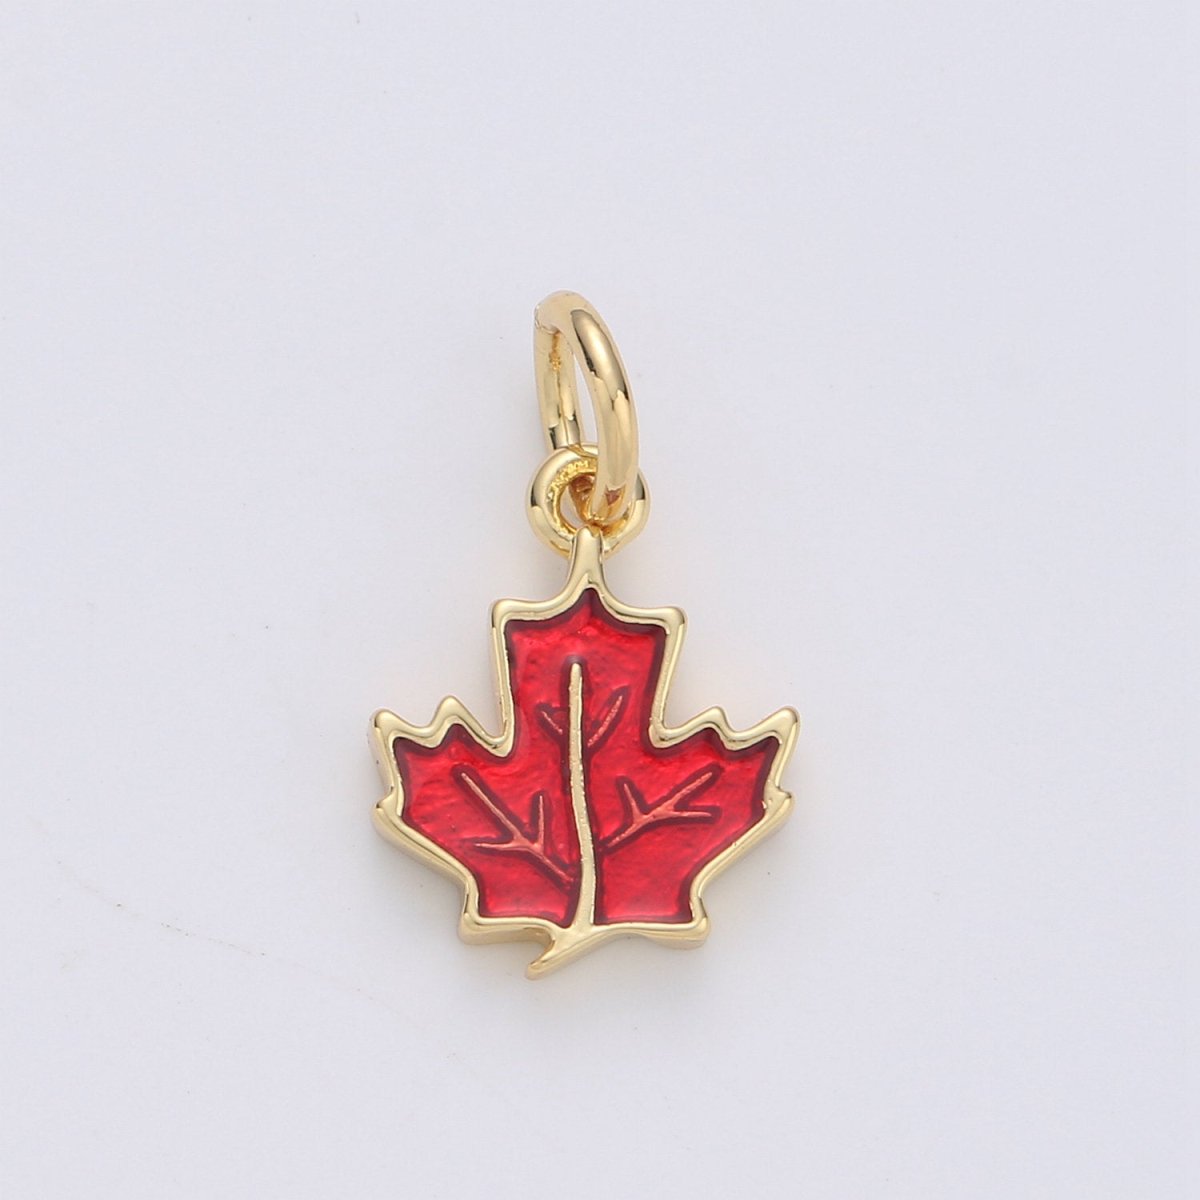 Dainty Red Maple Pendant Enamel Maple Tree Charm, Gold Canada Charm Jewelry for Necklace Bracelet Earring Component D-190 D-191 - DLUXCA